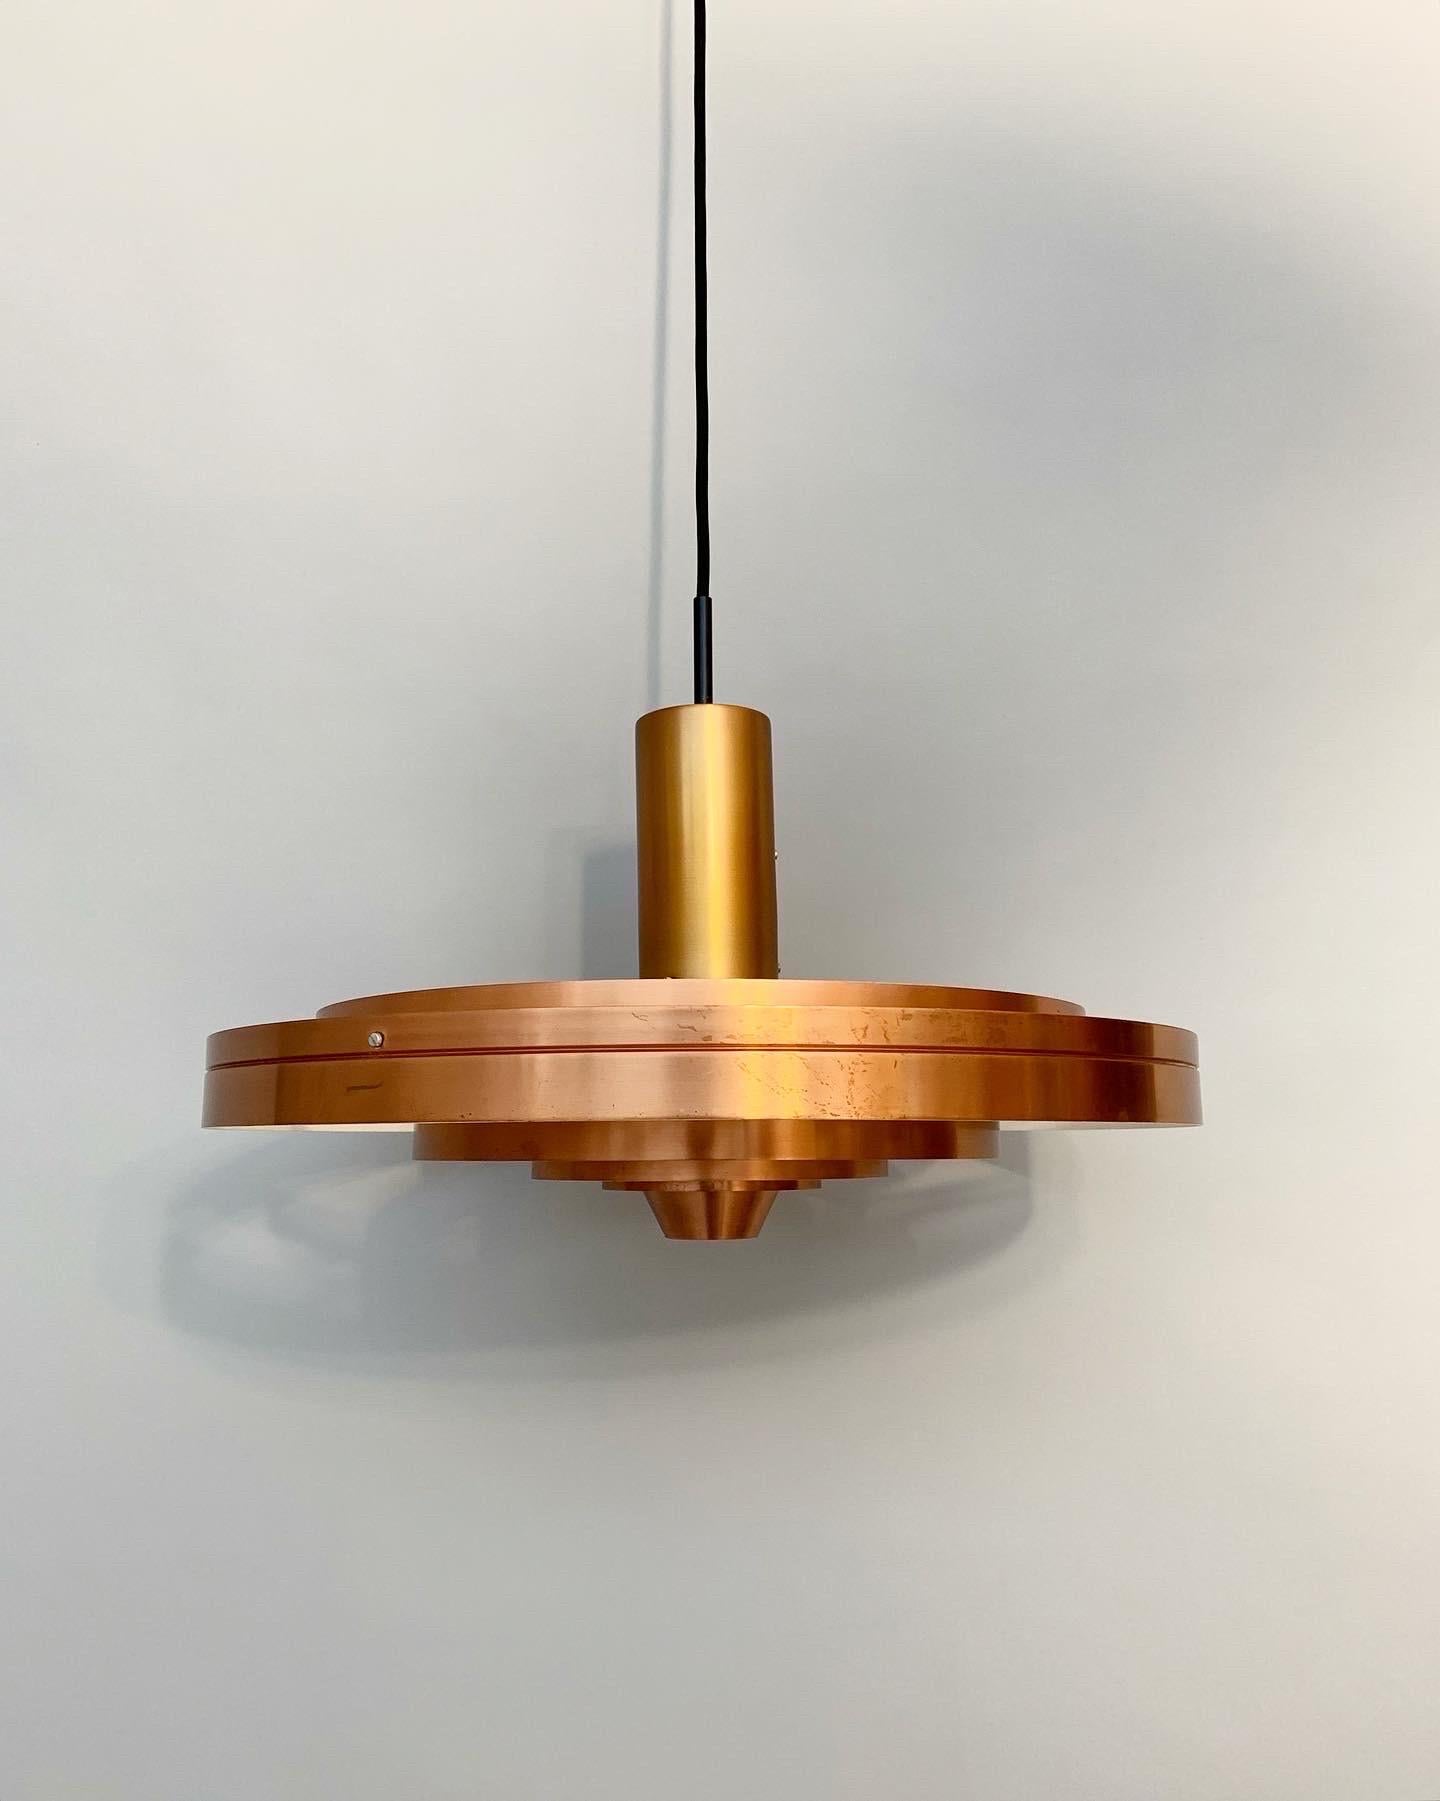 Rare copper pendant designed by Sophus Frandsen for Fog & Mørup in 1963.

Awarded the gold medal at the Leipzig fair in 1967. Described as „technical lighting perfection combined with architectural beauty“ on the fact sheet by Fog & Mørup.

Made